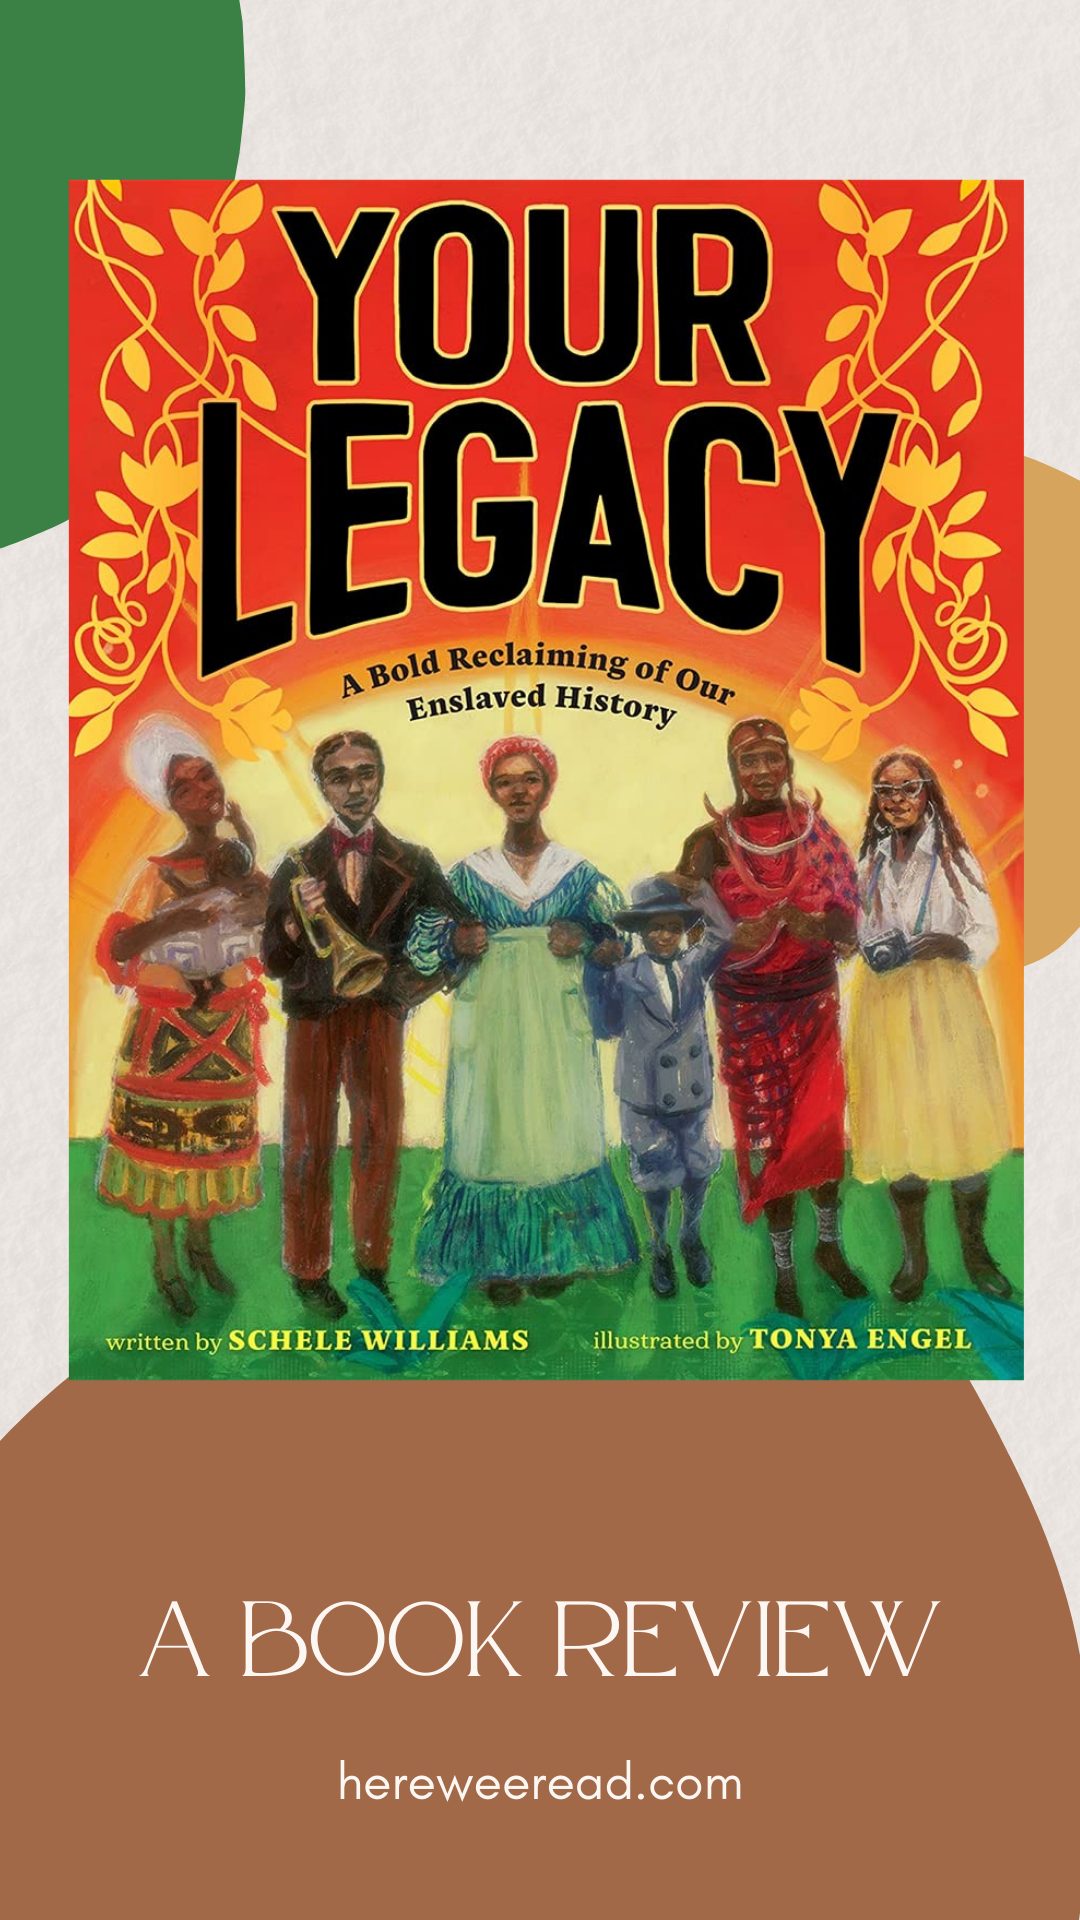 Your Legacy: A Bold Reclaiming of Our Enslaved History